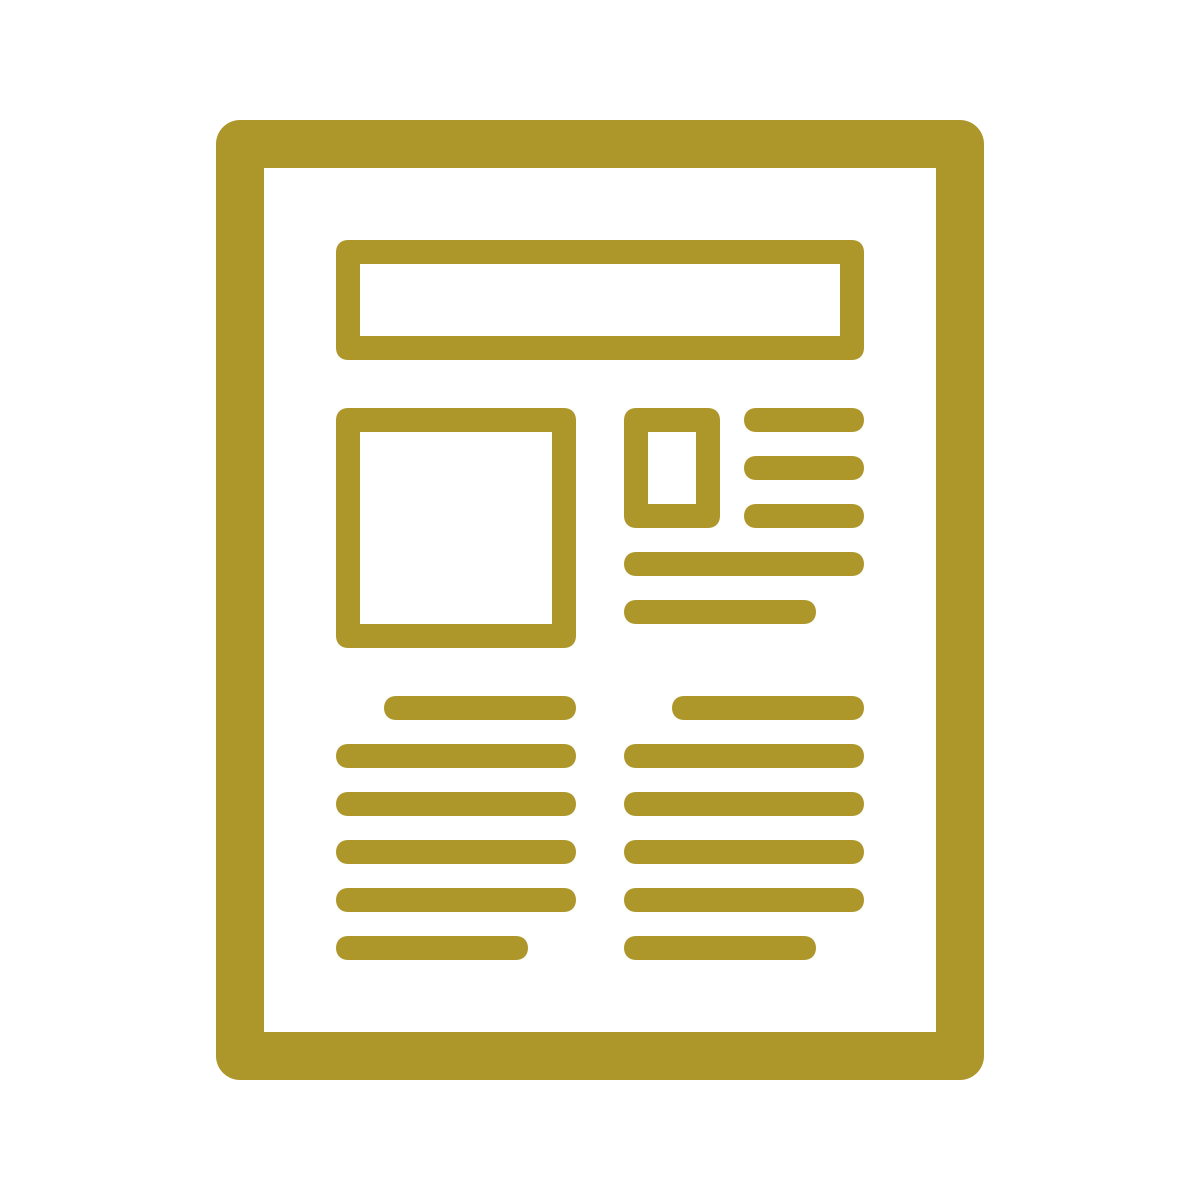 Icon of a piece of paper with lines and shapes indicating texts and graphics in gold